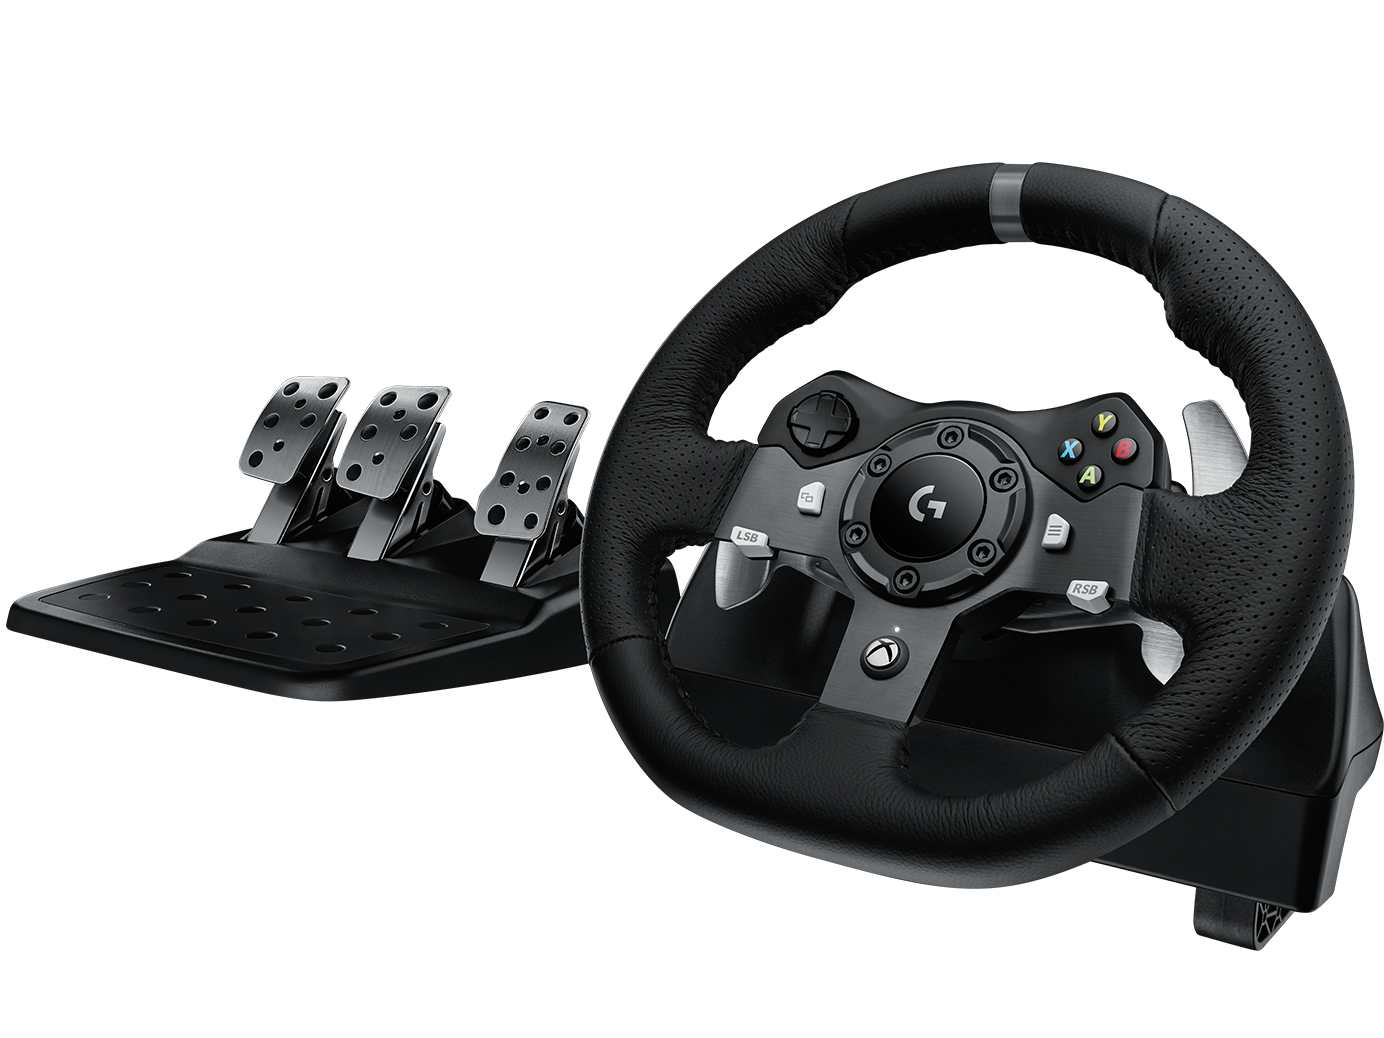 Logitech G920 Racing Wheel for Xbox and PC